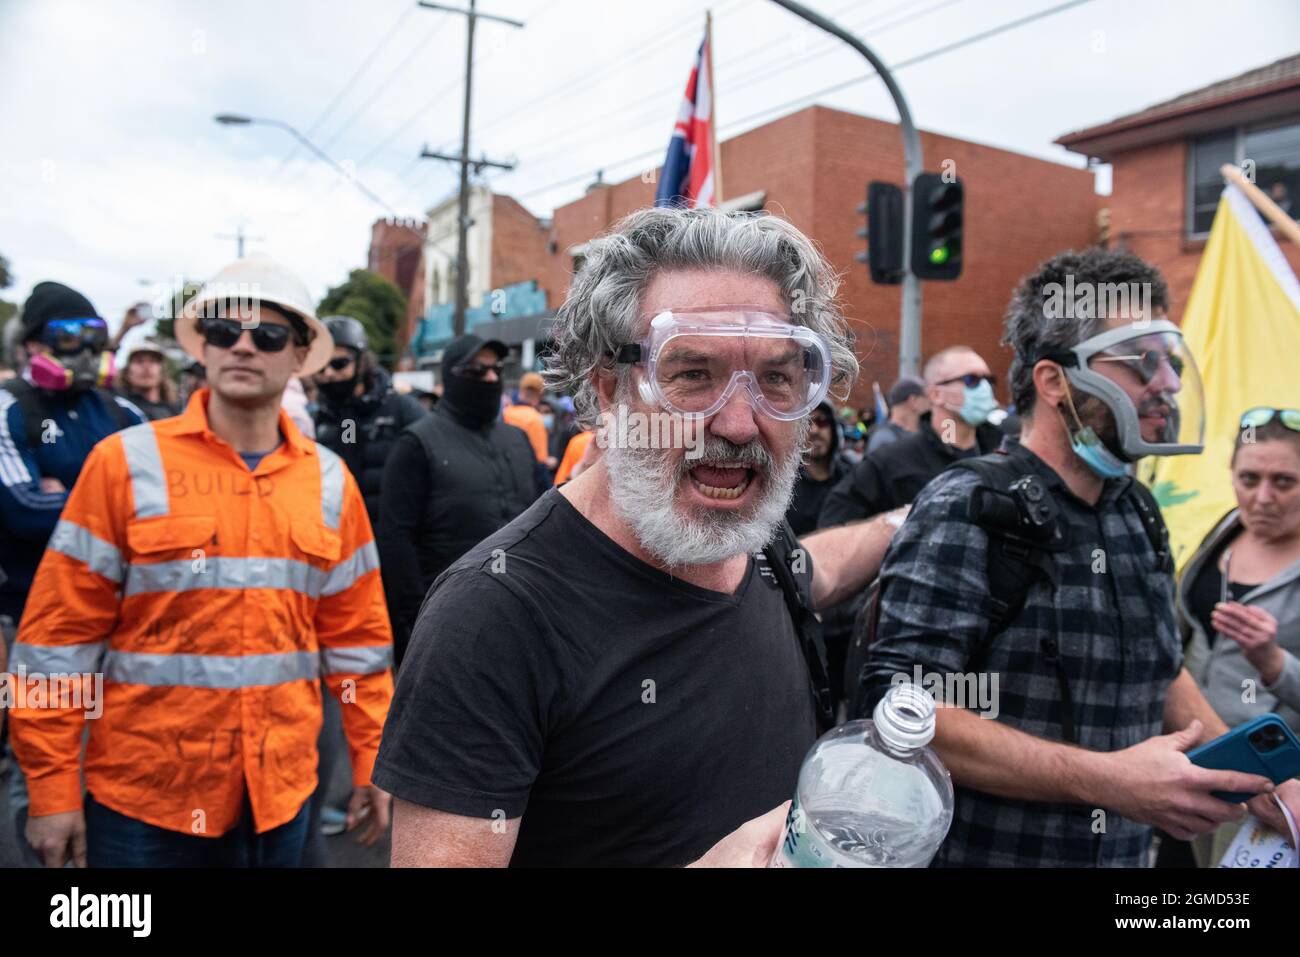 Melbourne, Australia. 18th September 2021. Anti-lockdown protesters with protective face gear yell at police, asking the officers to join them. Credit: Jay Kogler/Alamy Live News Stock Photo